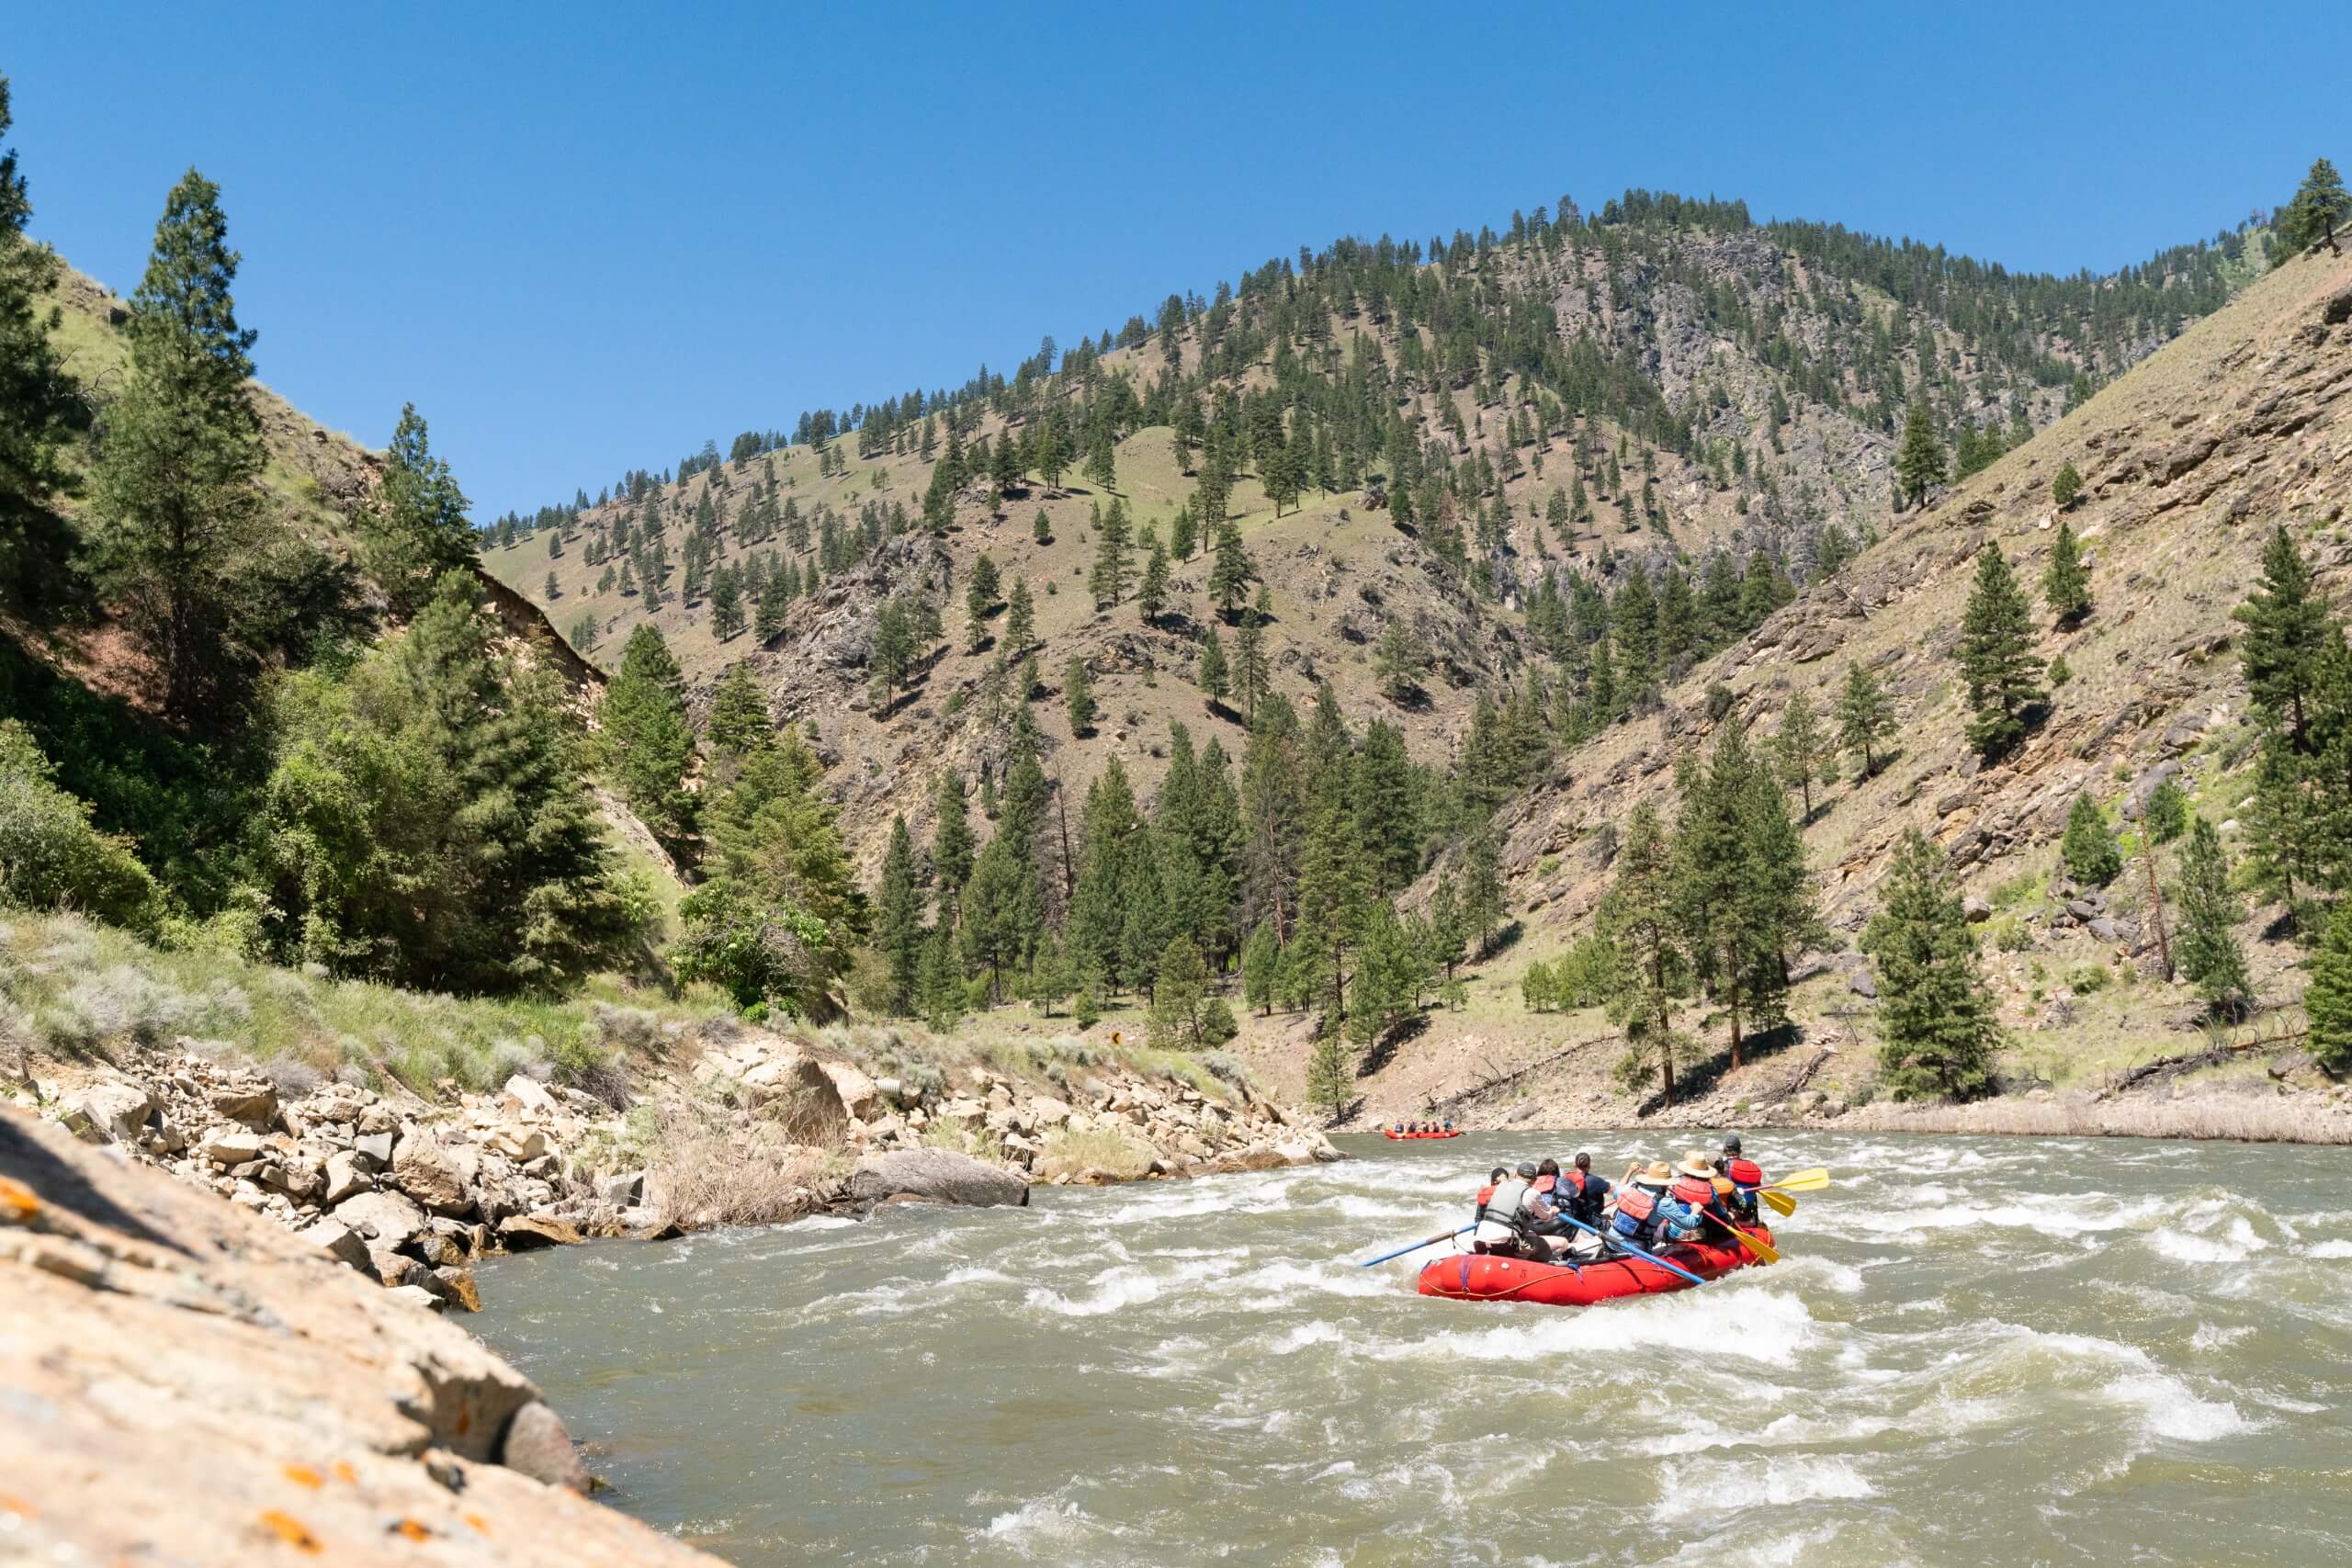 Guests white water rafting on the salmon river.